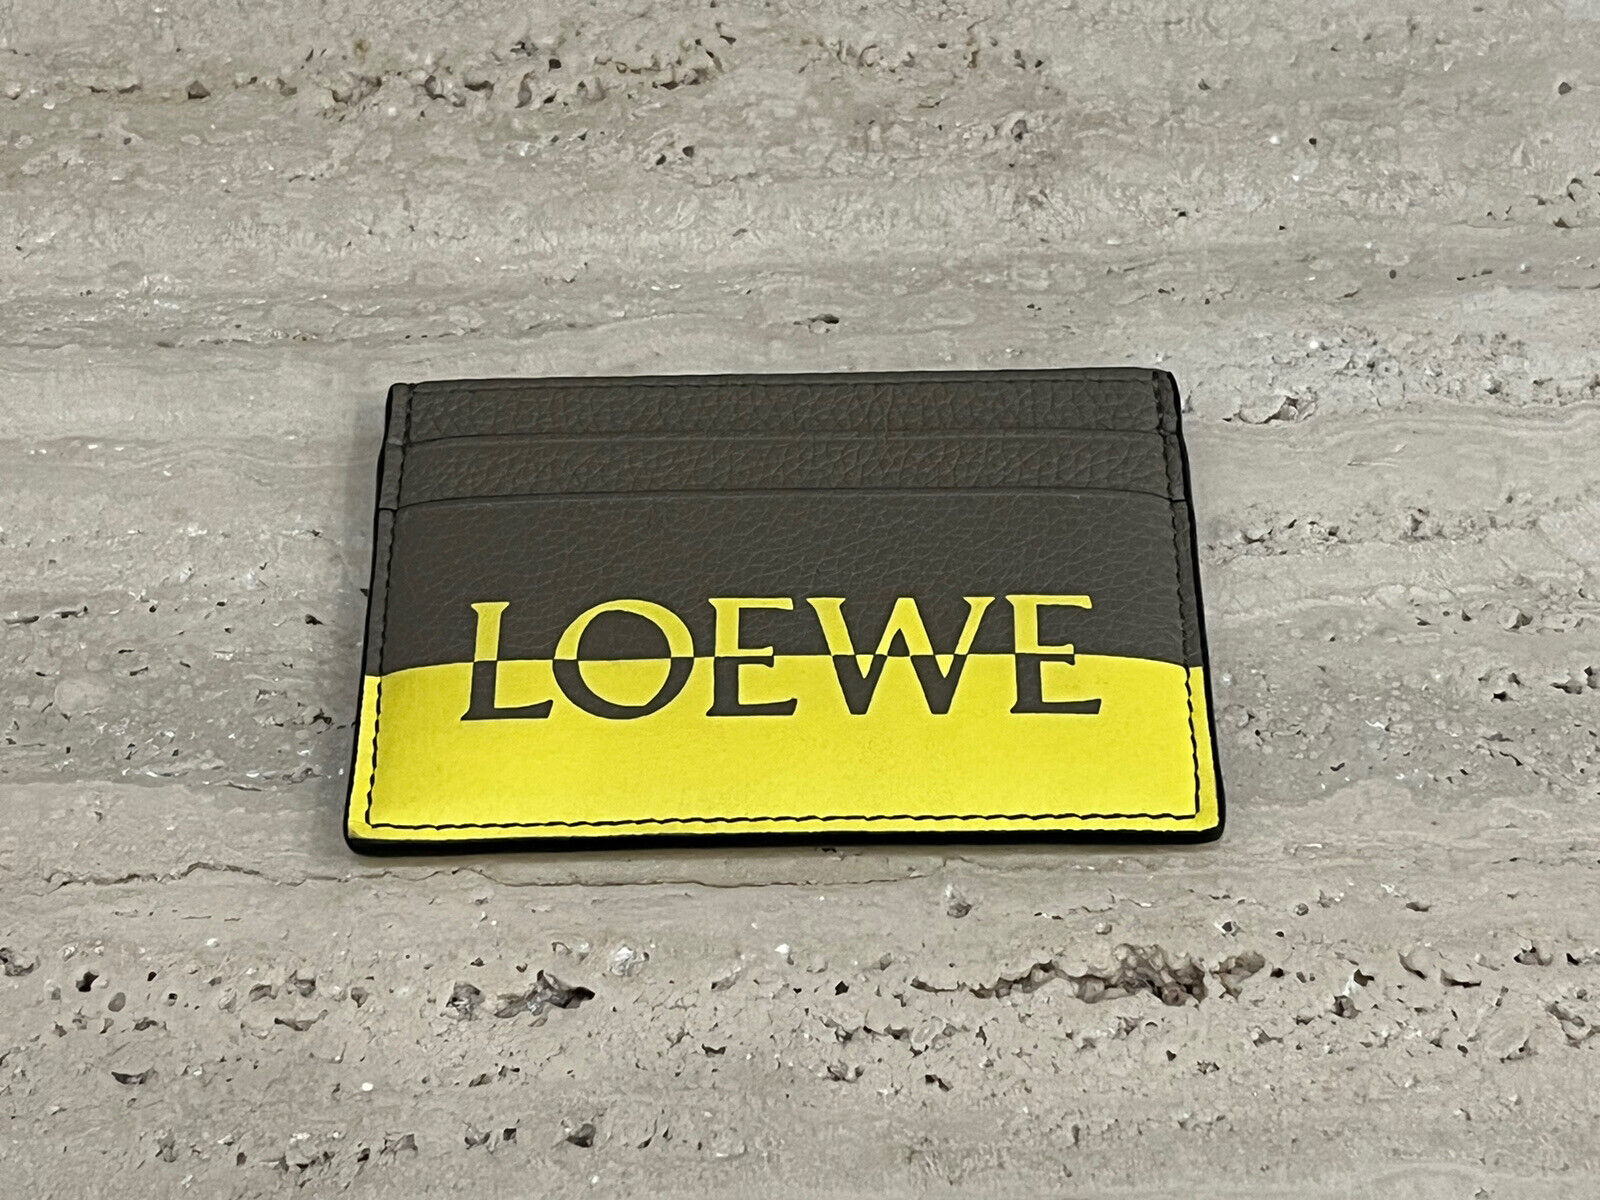 LOEWE NWT TAUPE YELLOW LEATHER CLASSIC LOGO CREDIT CARD HOLDER WALLET